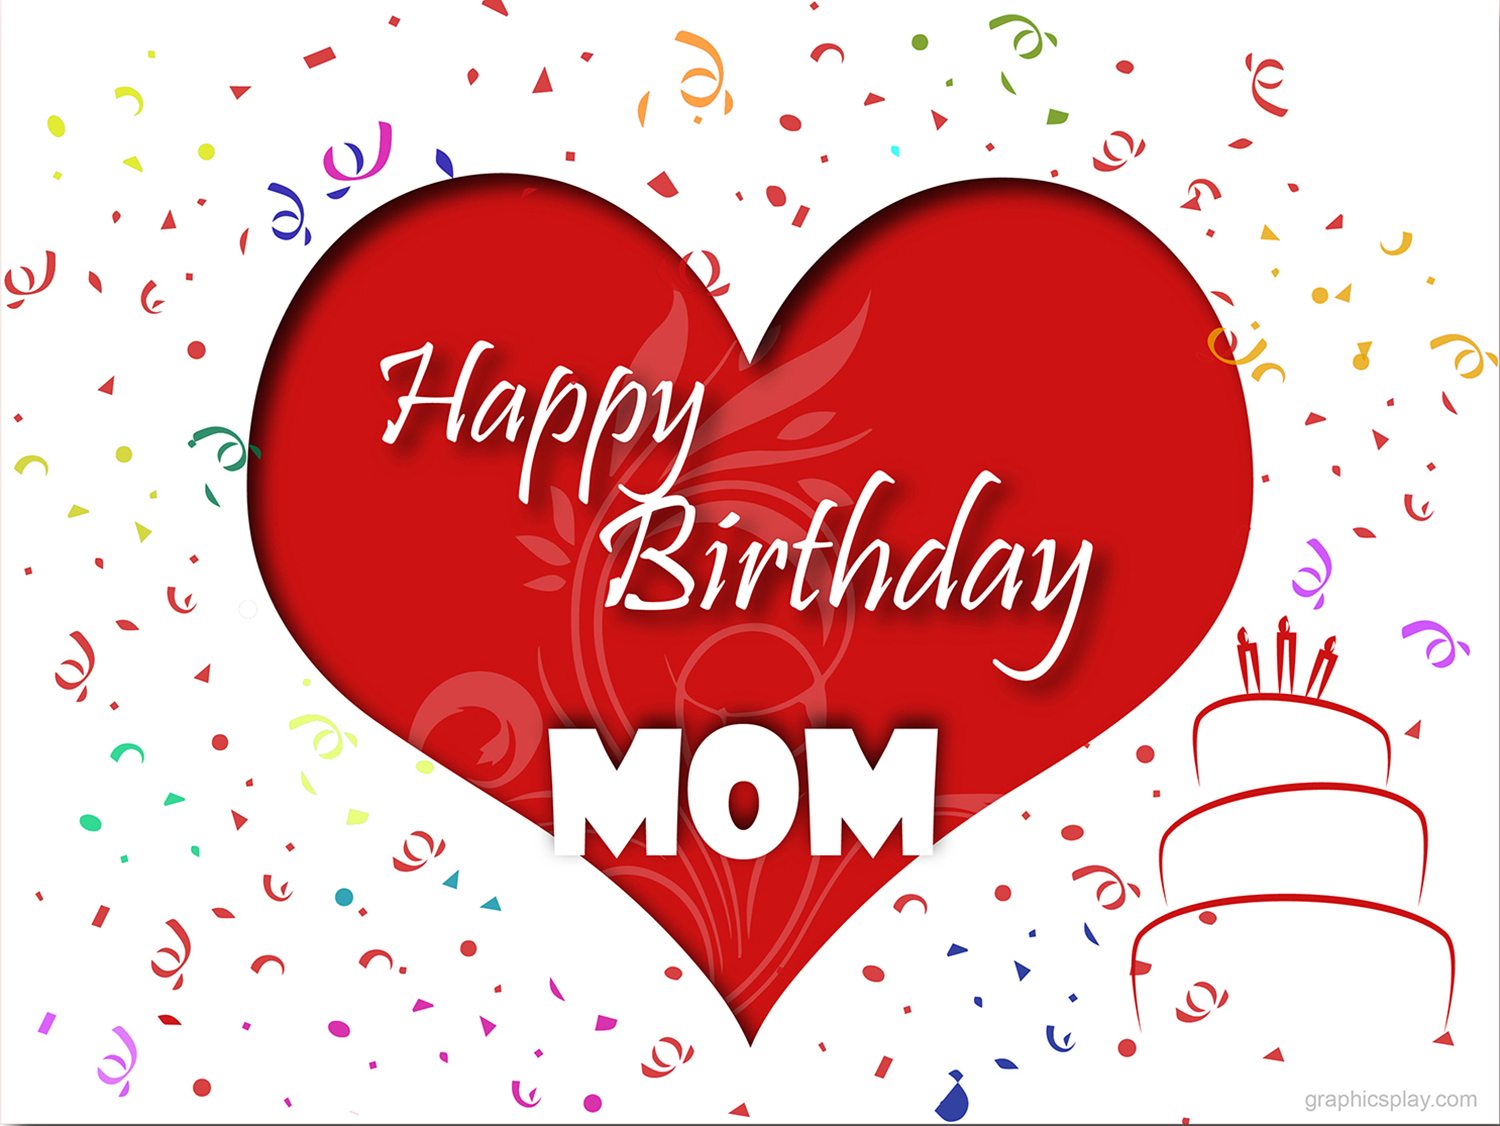 Happy Birthday Mom Greeting With Love Graphicsplay.